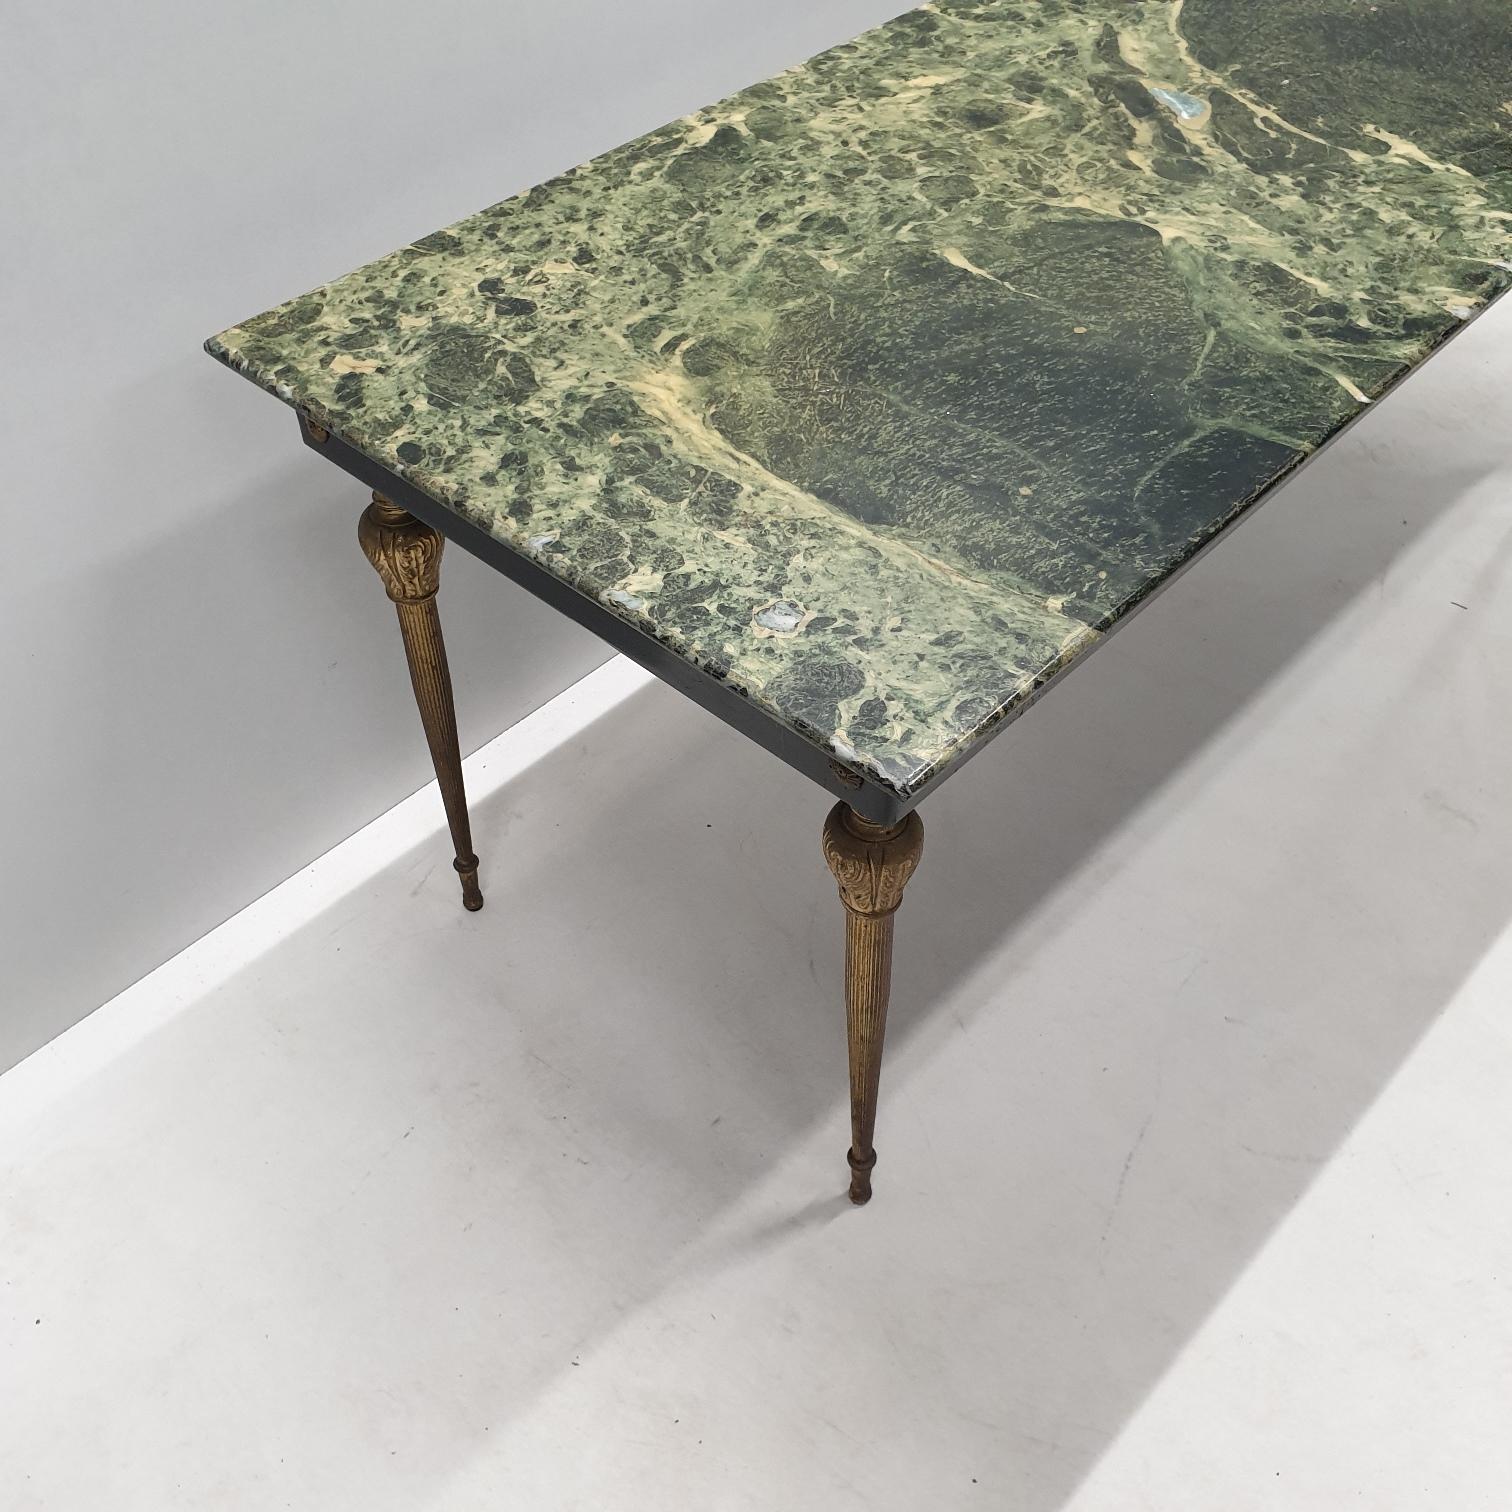 Faceted Vintage Brass Coffee Table with a Green Marble Top, 1950s For Sale